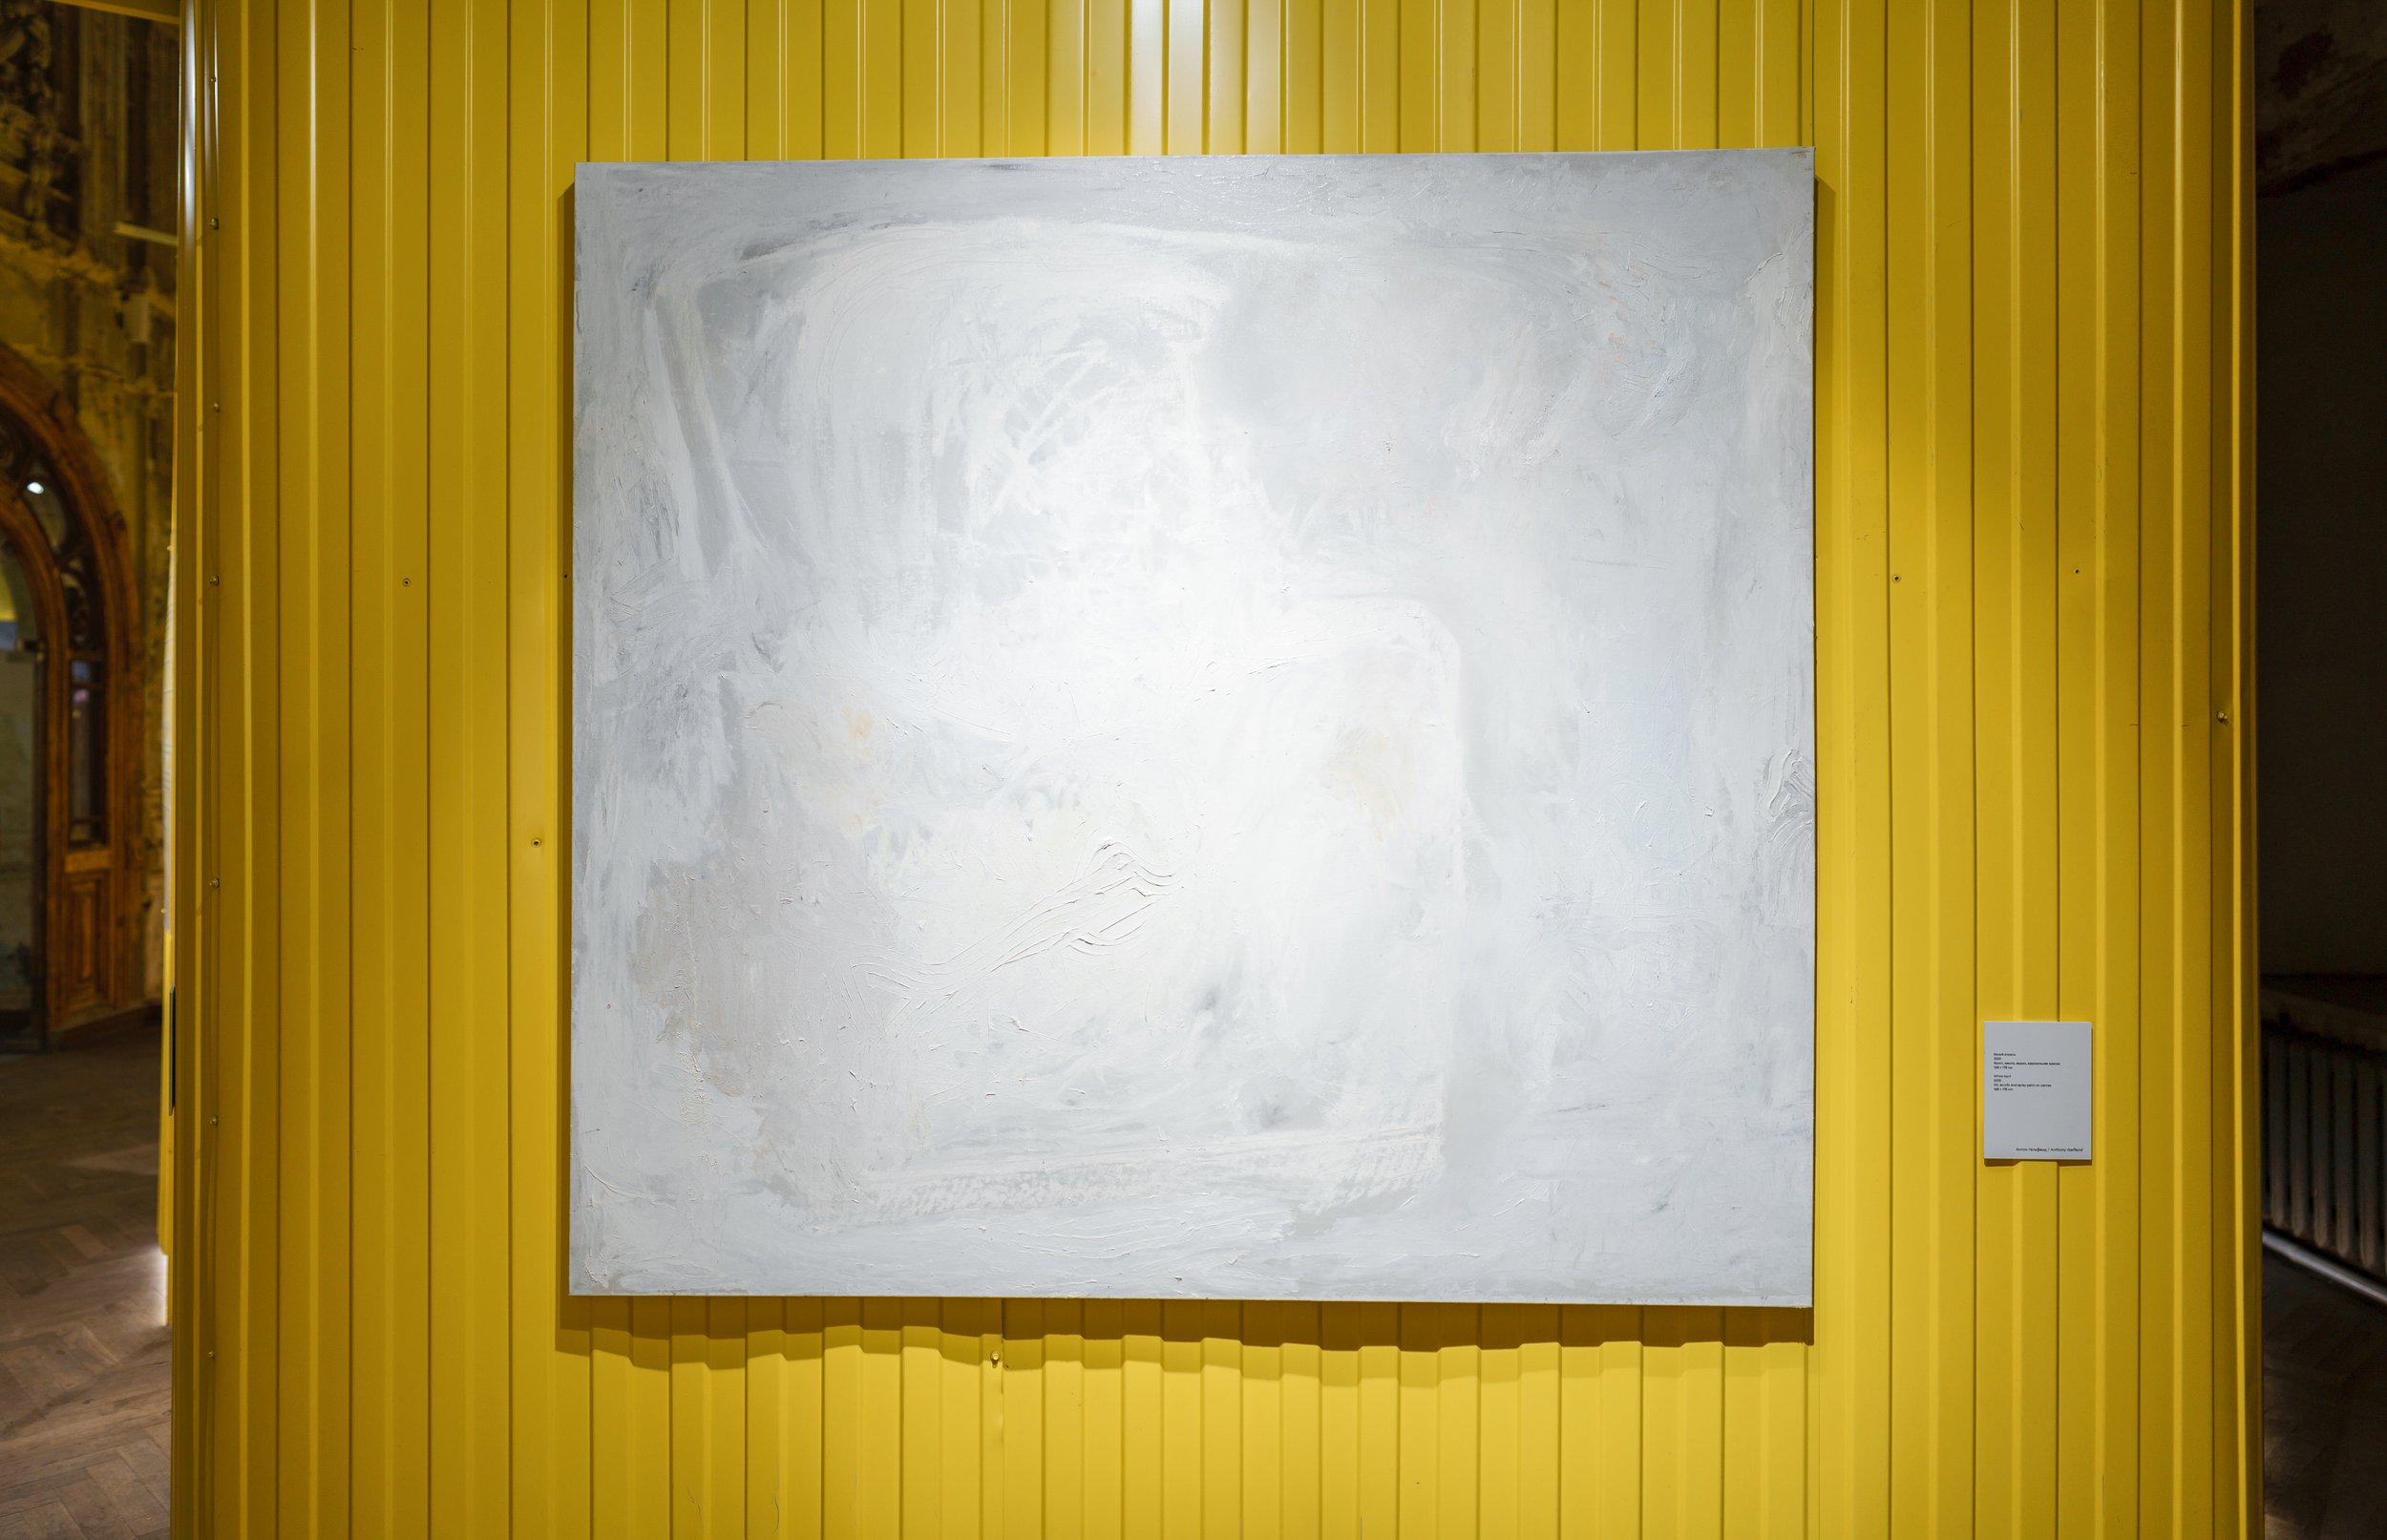   White April , 2021  Oil on canvas   62 X 70 inches 